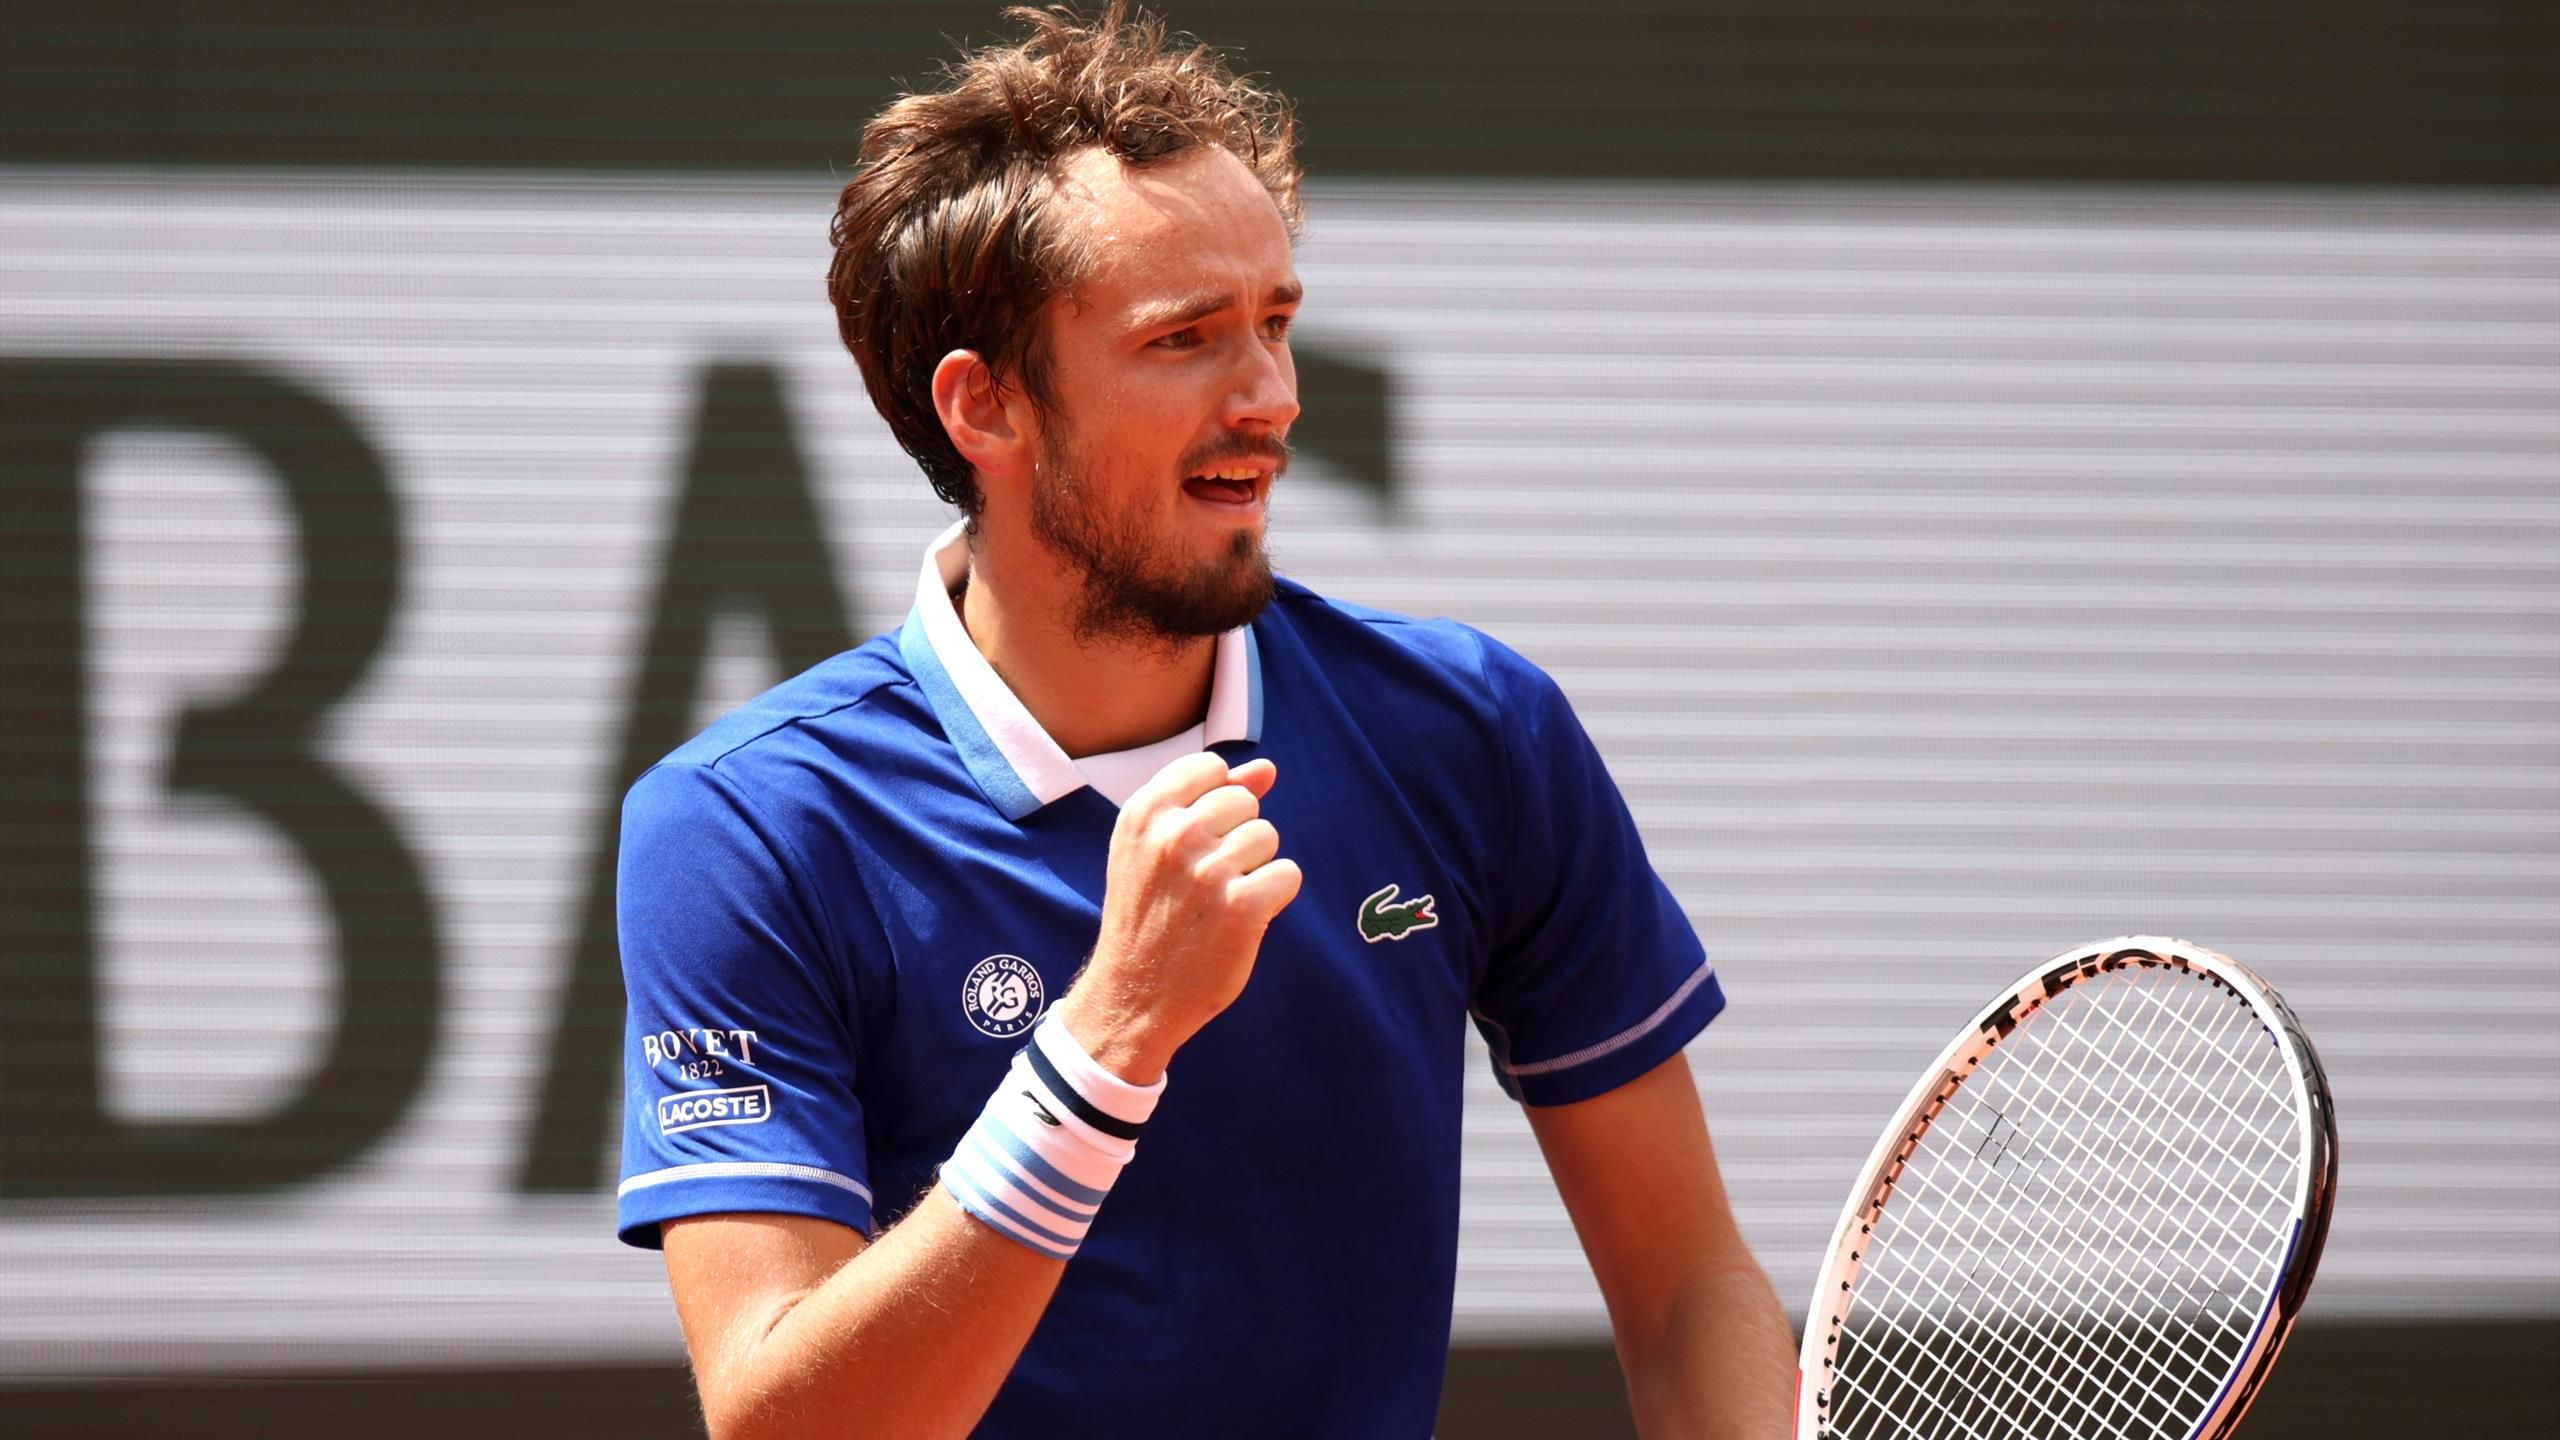 French Open 2022 Daniil Medvedev stumbles over the line against wasteful Laslo Djere to reach round three